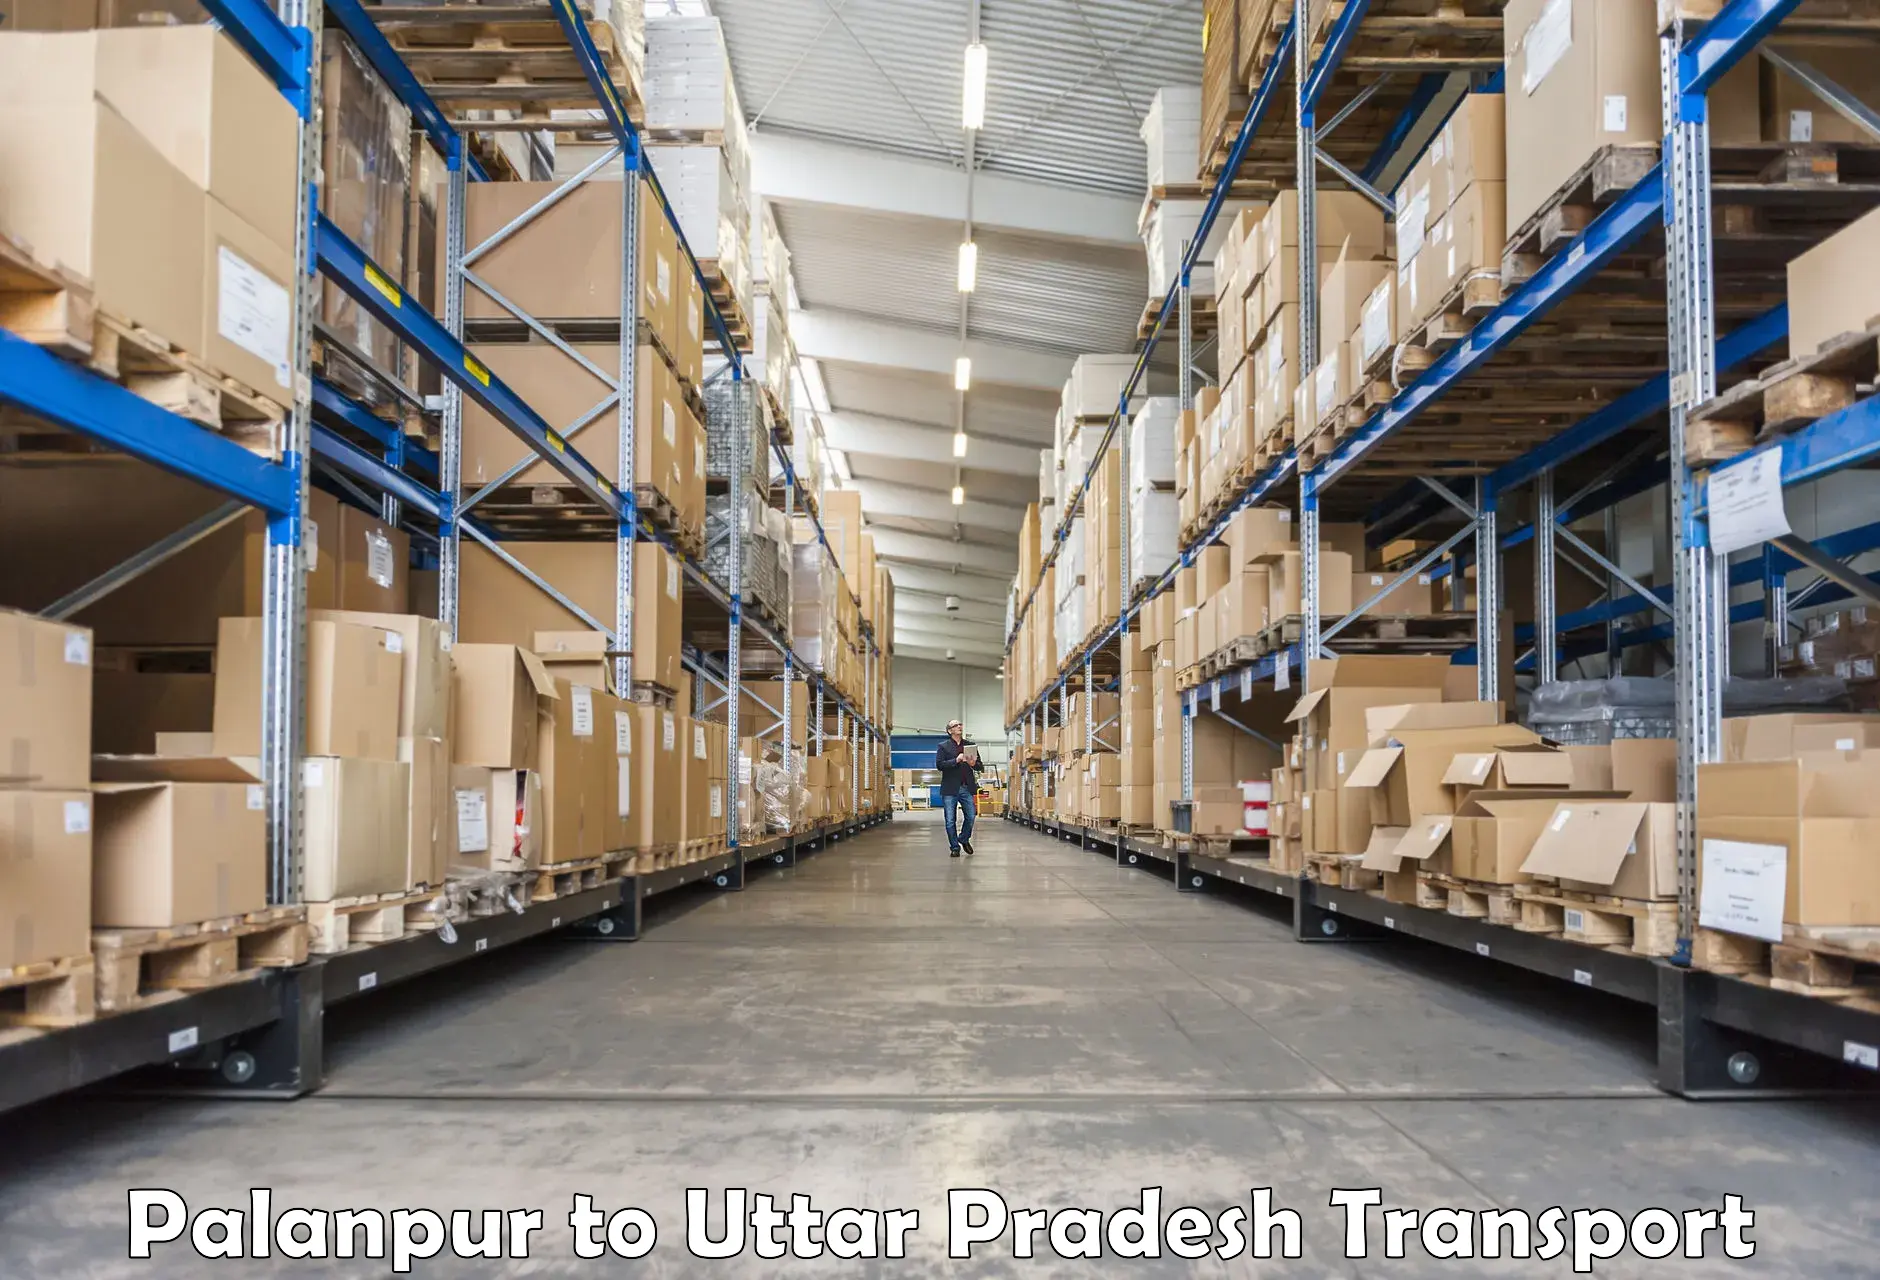 Vehicle transport services in Palanpur to Amethi